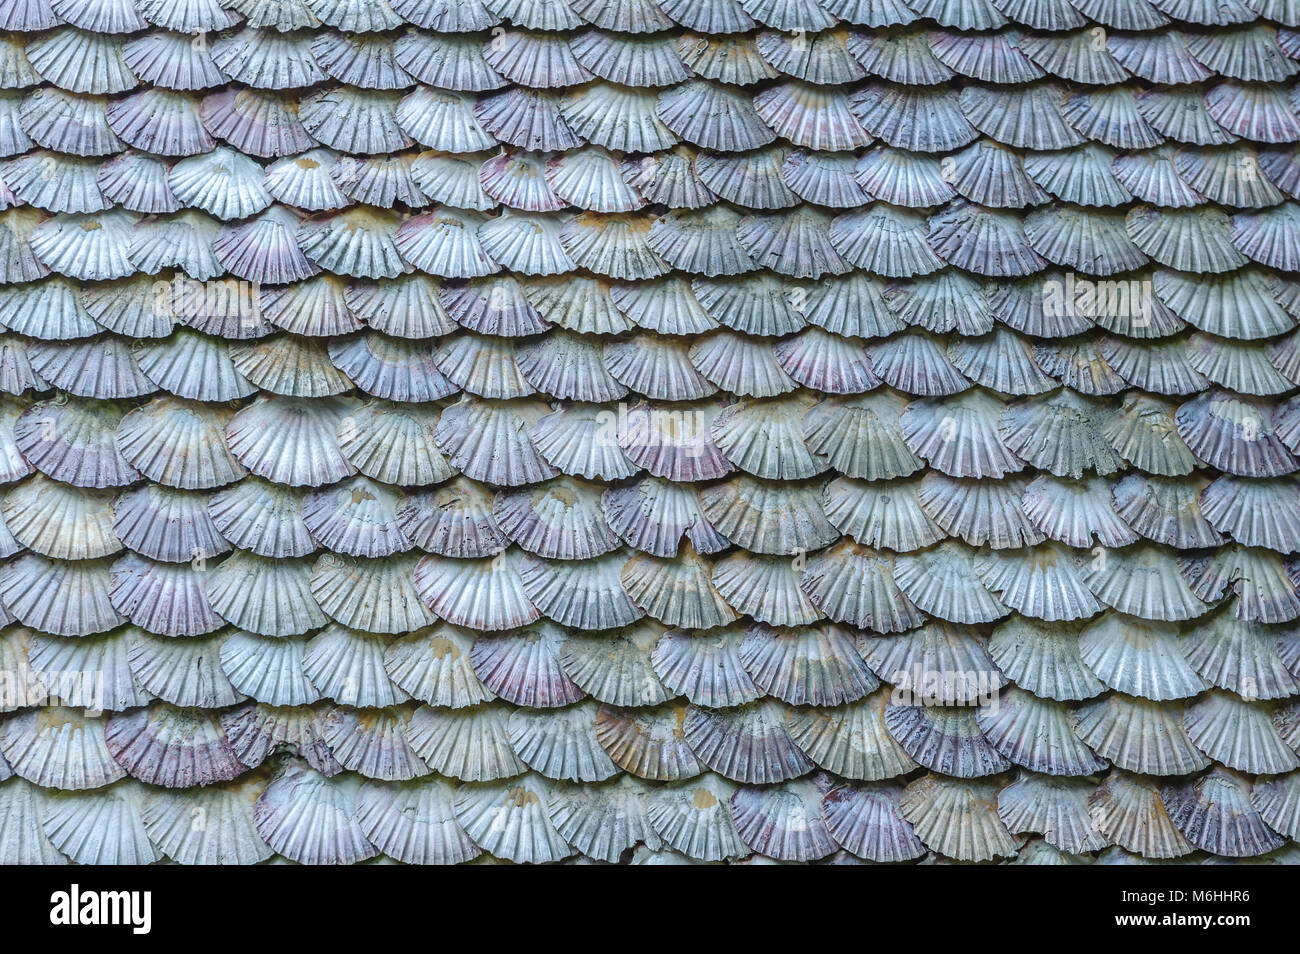 Background of scallop shells Stock Photo